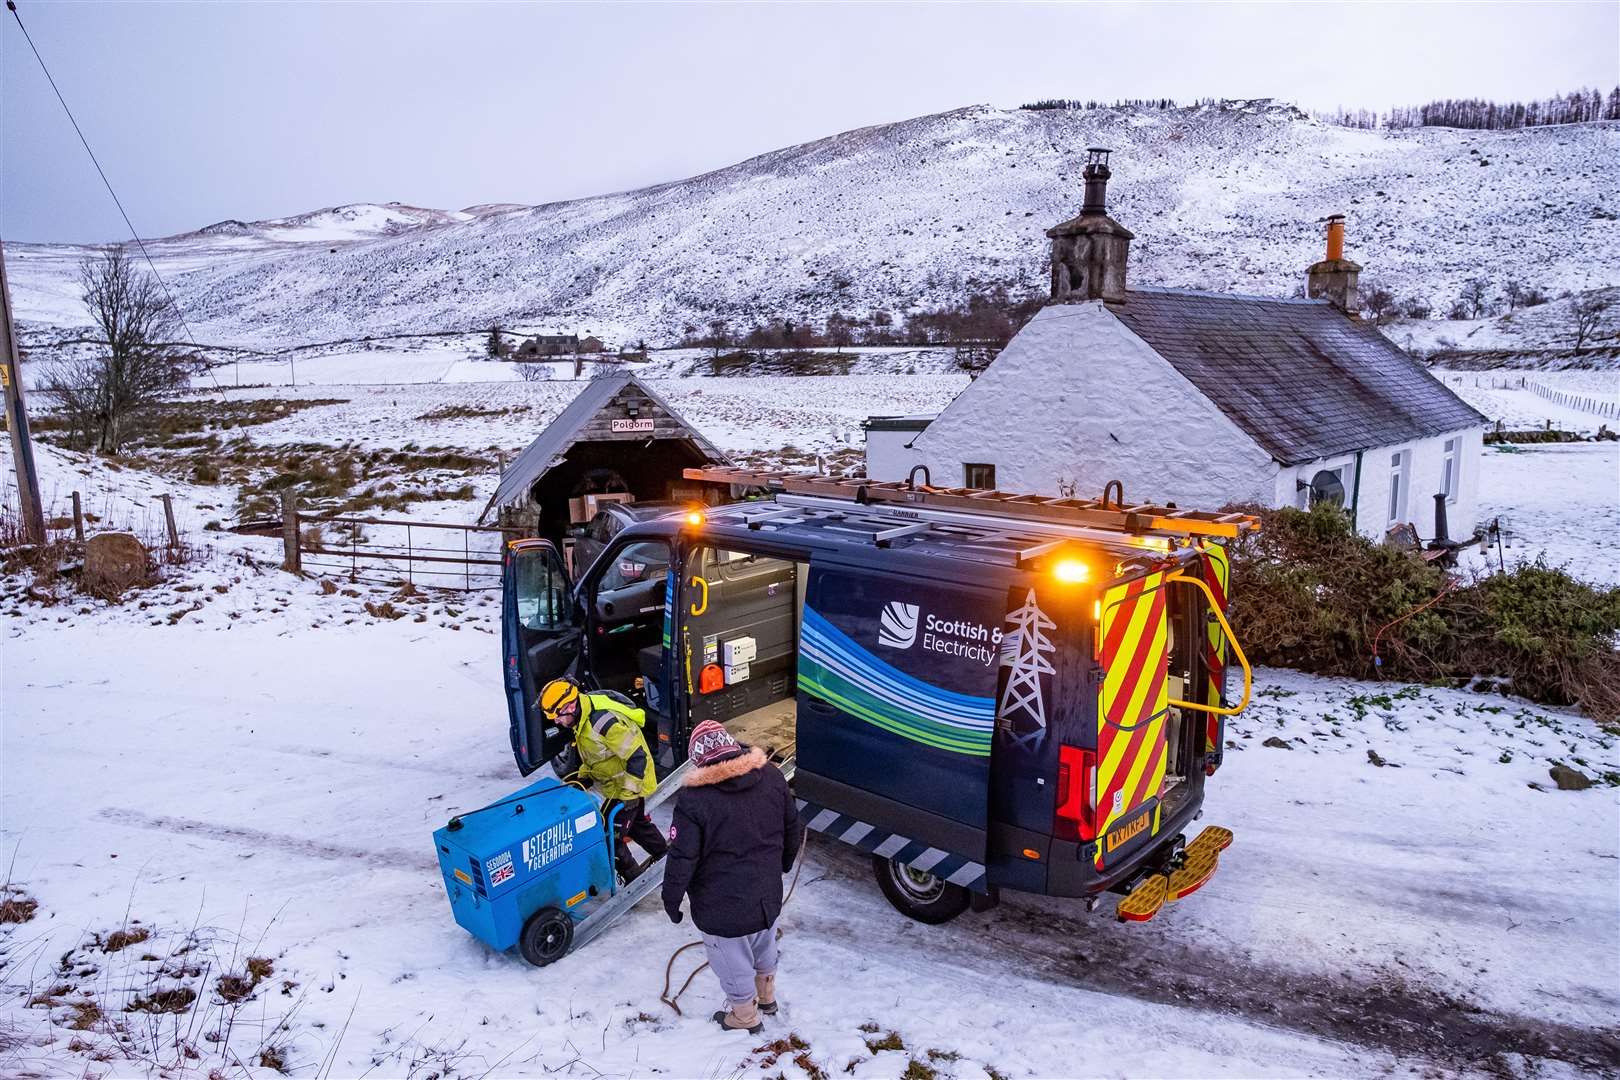 SSEN - Storm Arwen - Customer Generator Delivery Picture Shows: An SSEN engineer delivering a portable generator to a venerable family at a remote cottage in Glenshee, Monday 29 November 2021...©Stuart Nicol Photography, 2021..